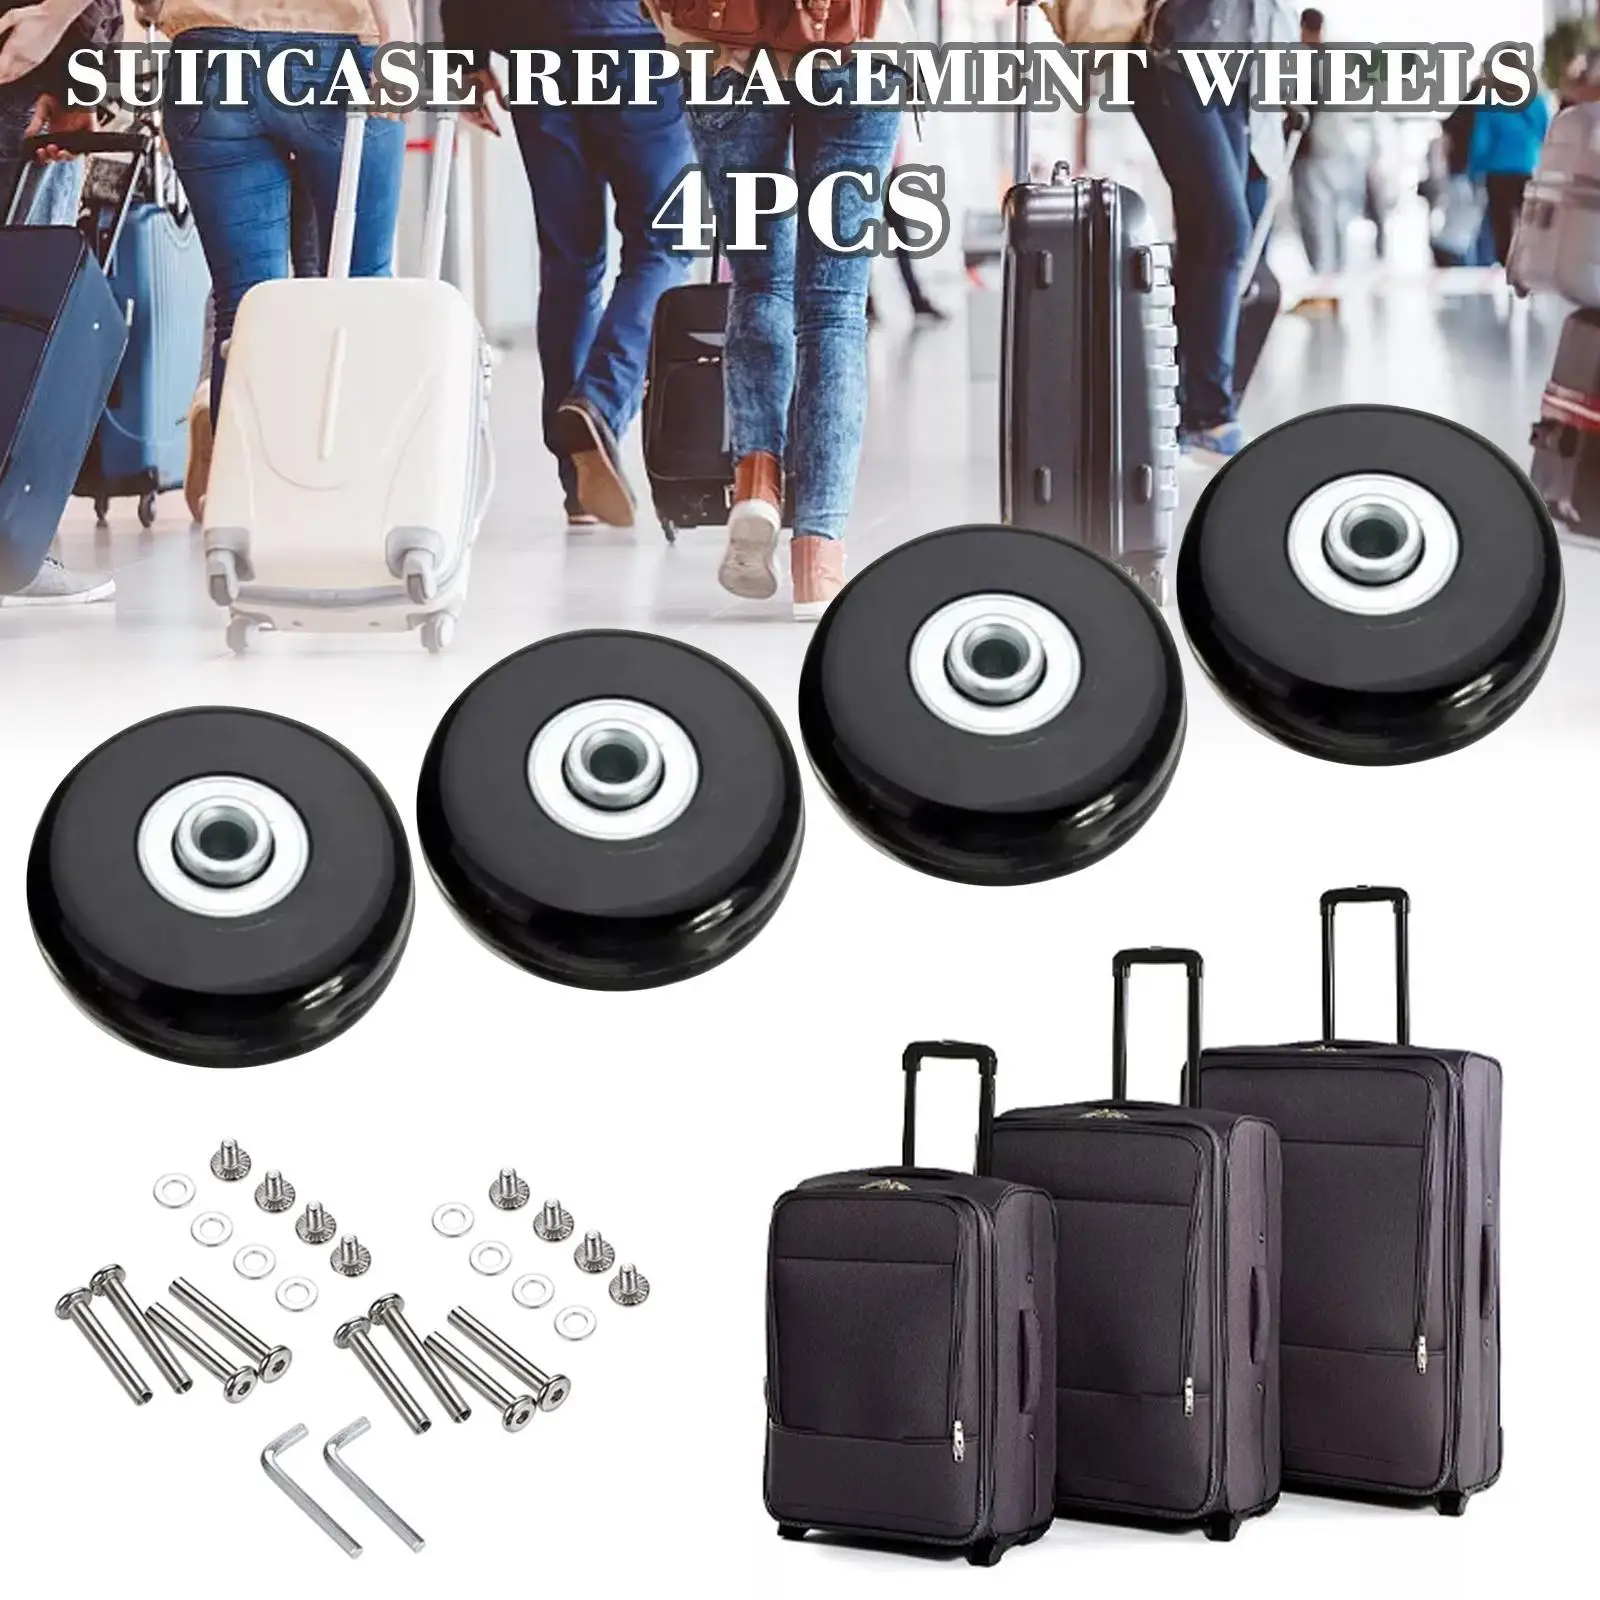 4Pcs Flexible Luggage Wheel Practical Replacement Roller Screw Durable  Silent With Repair Tool Travel Accessories Suitcase - AliExpress